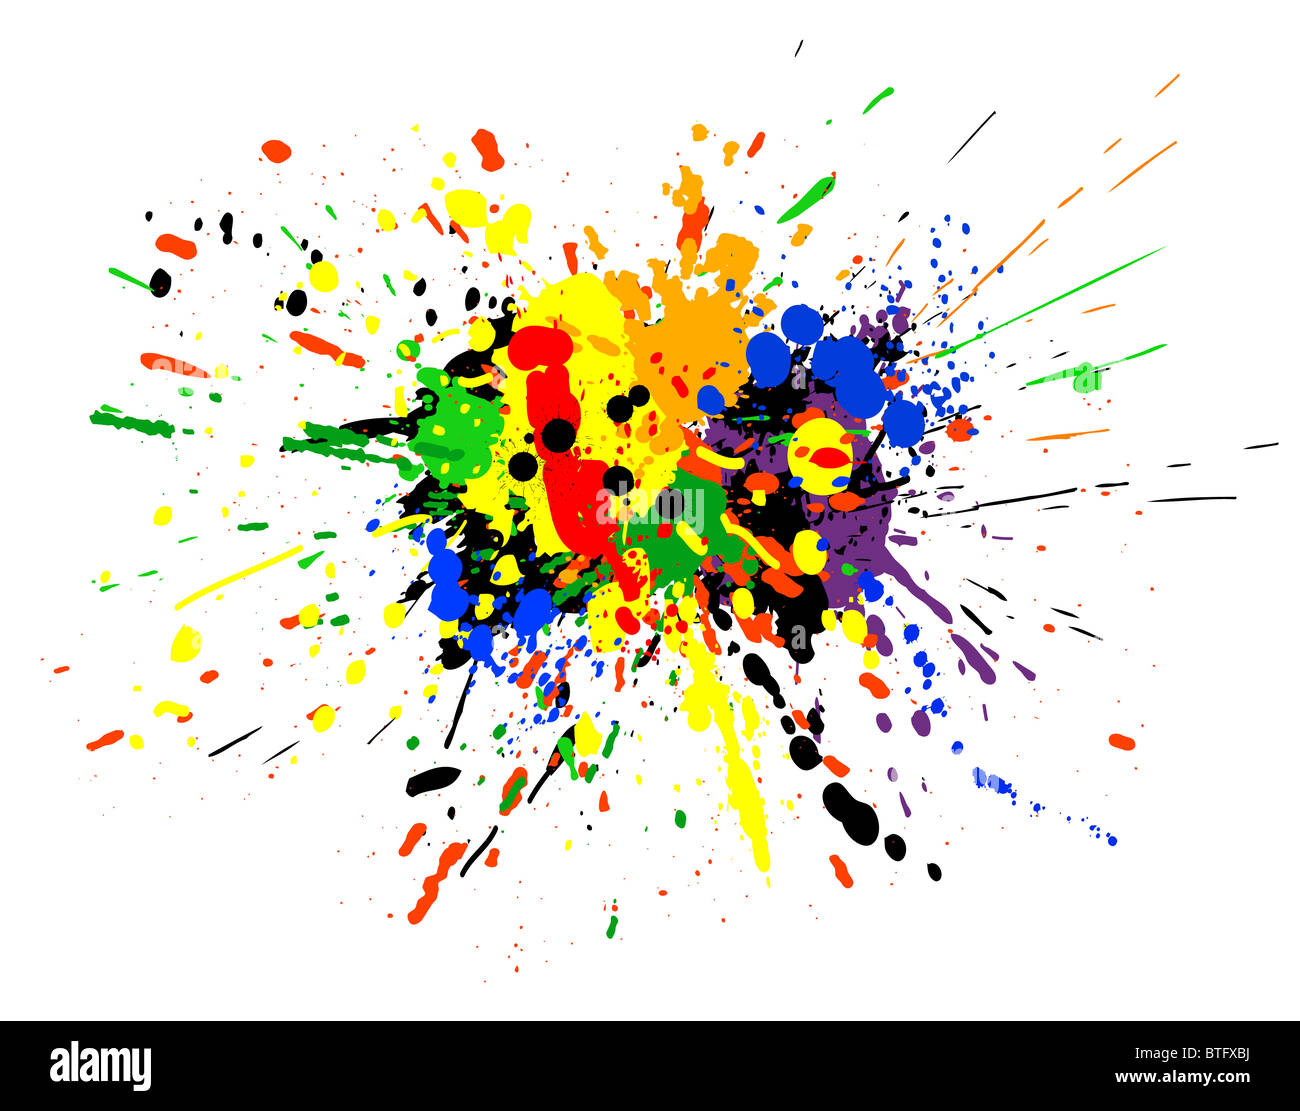 Illustrated design of colorful paint spill grunge Stock Photo